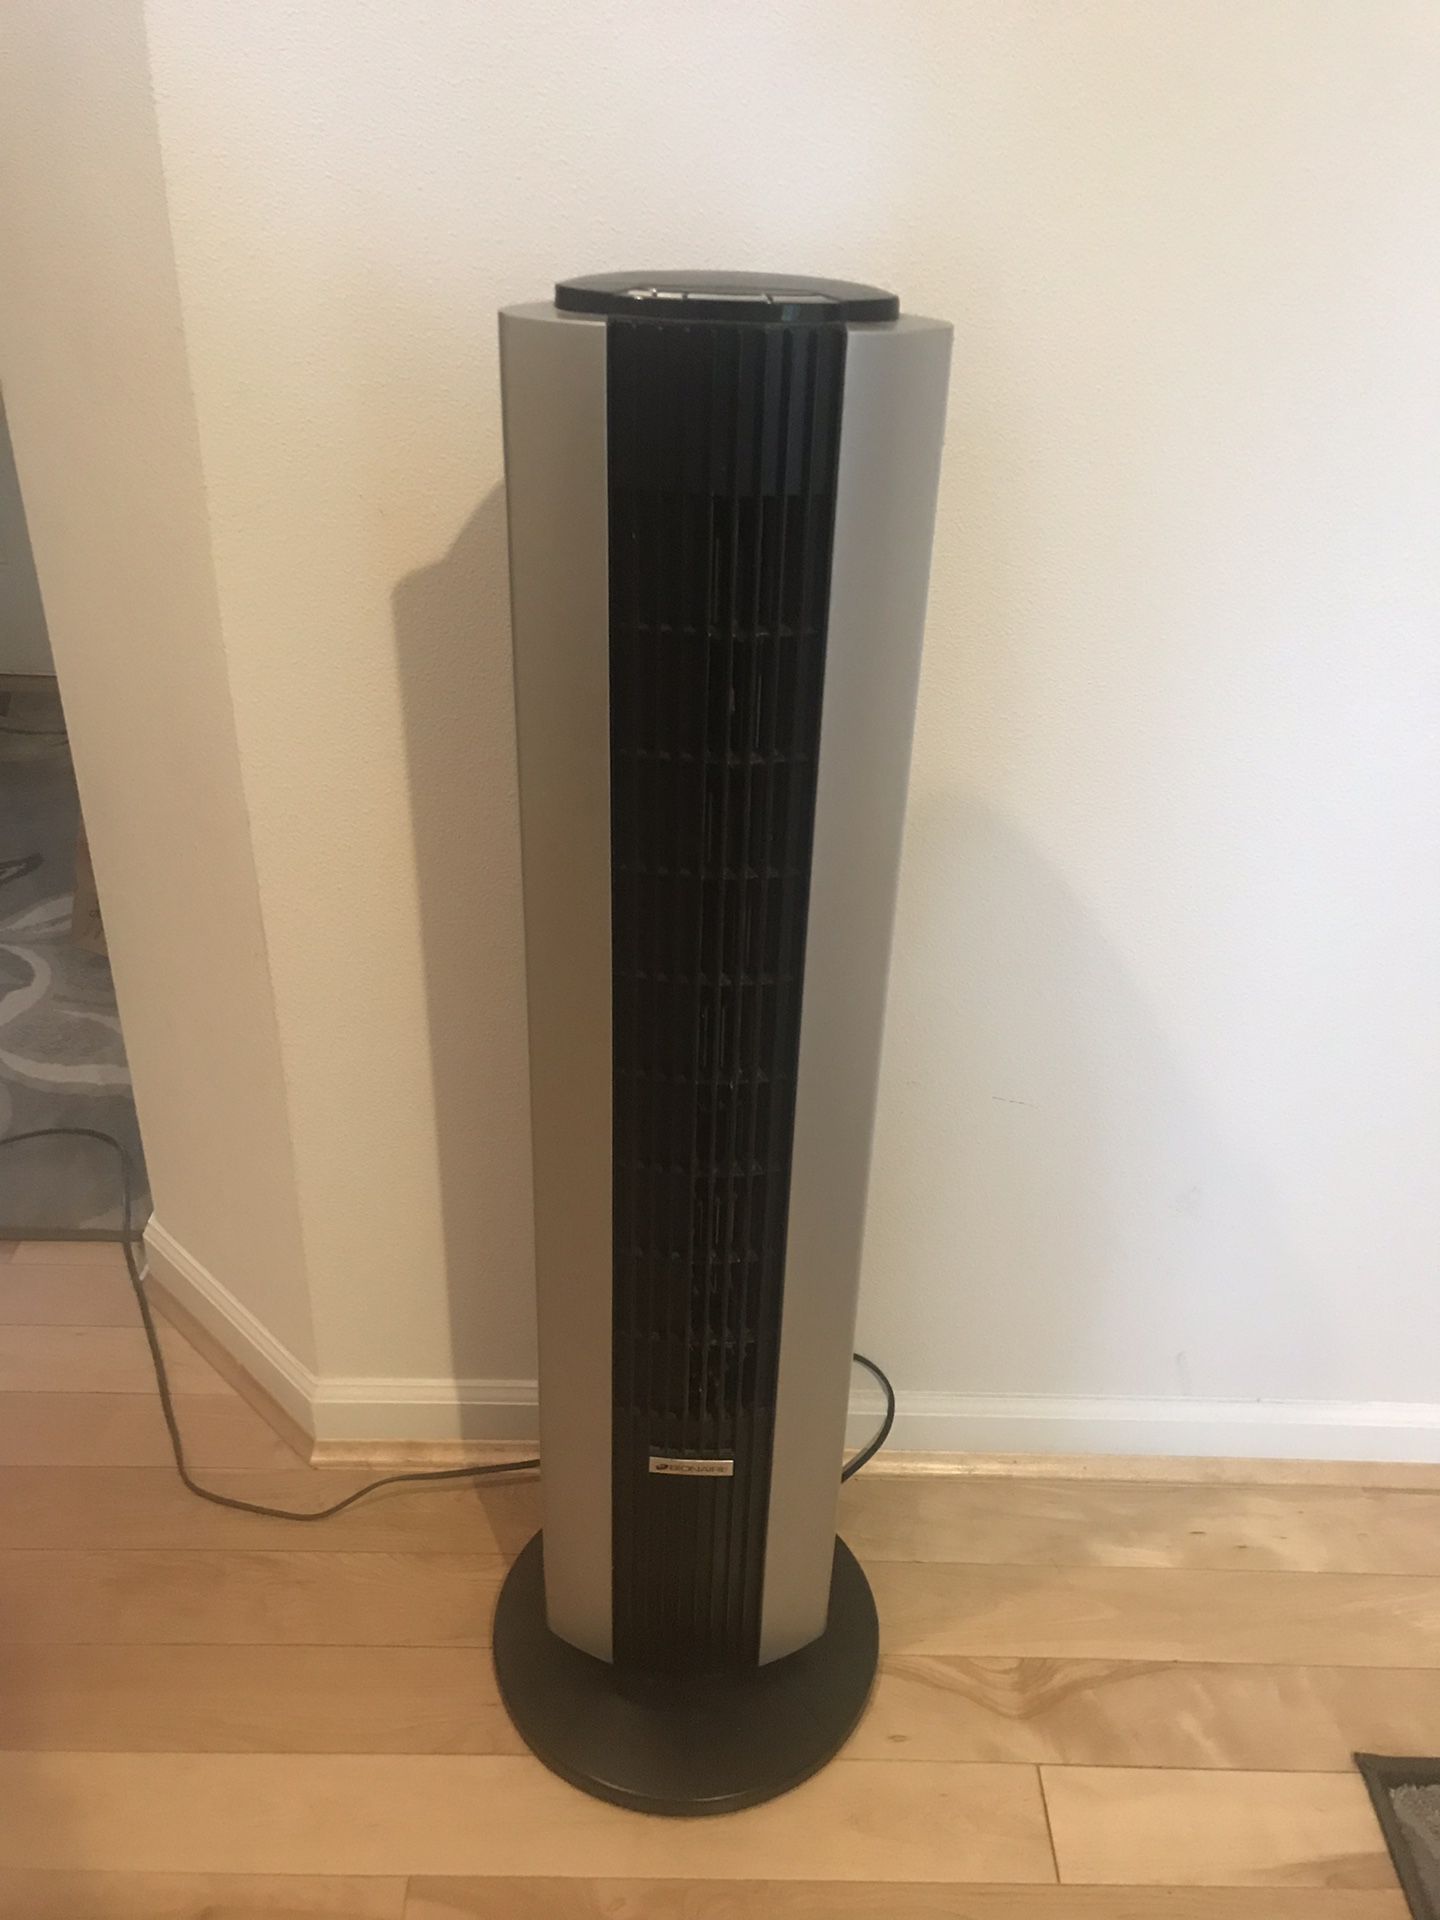 Bonaire Multi speed Tower Oscillating Fan with Remote